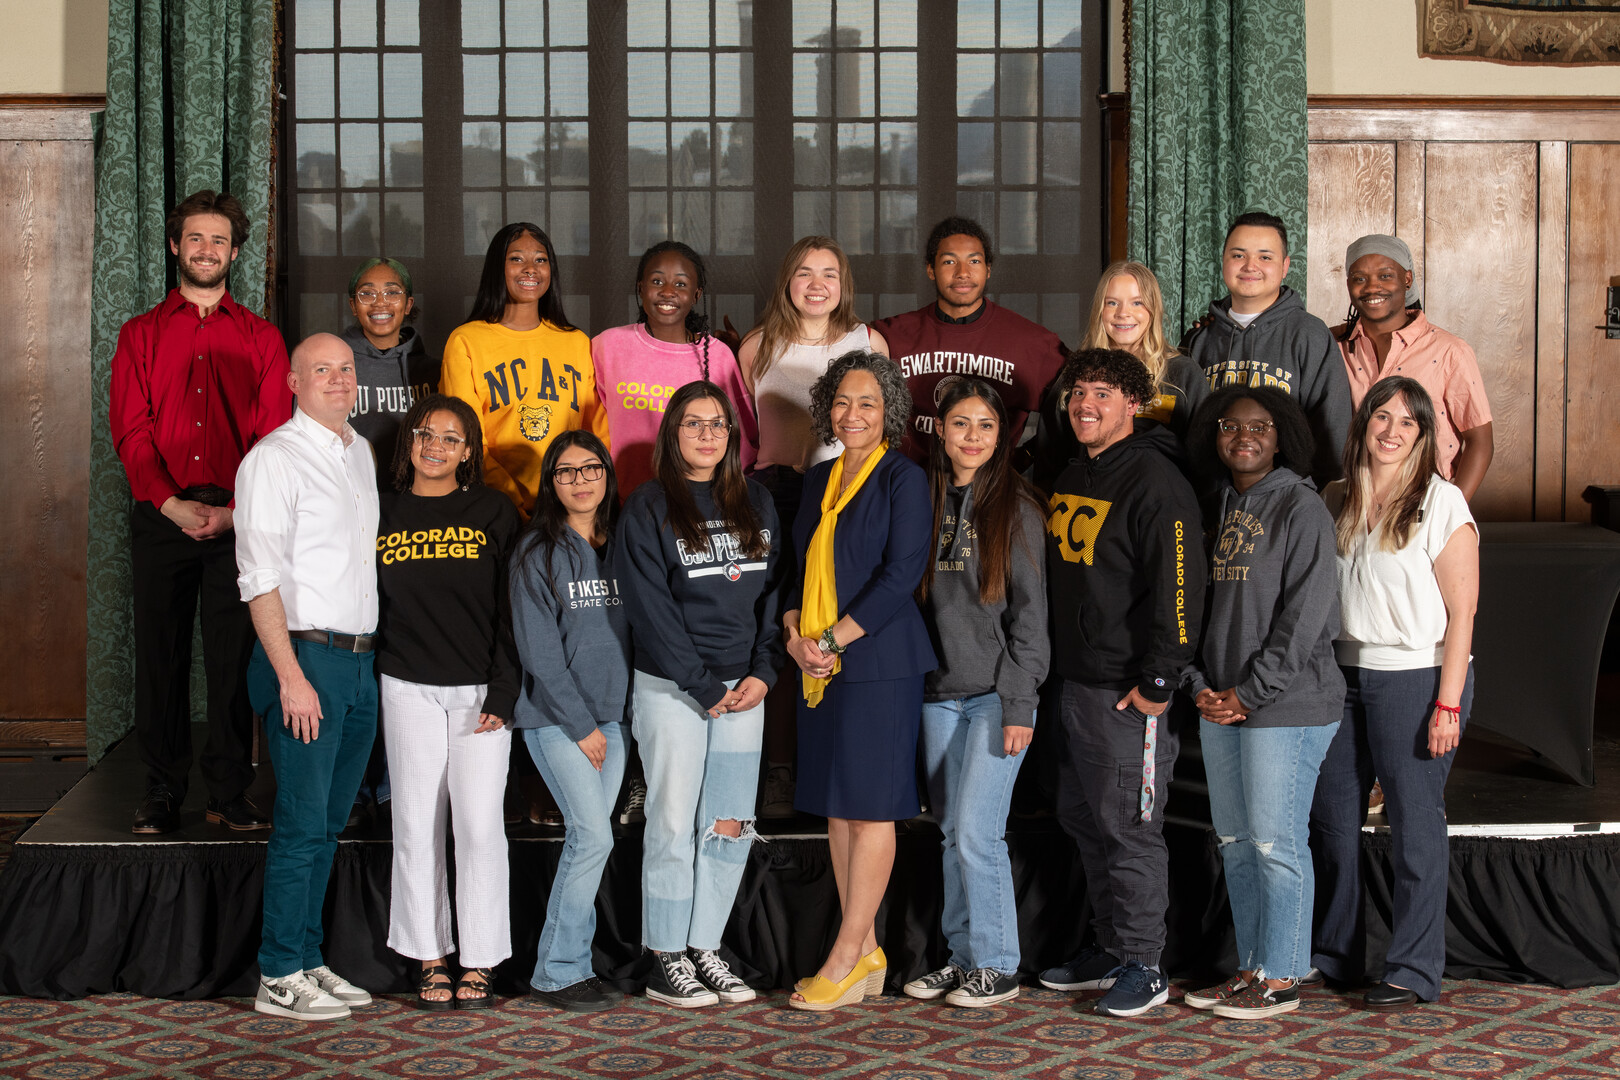 Meet most of the inaugural cohort of Stroud Scholars at the College Signing Day event May 1. Photo by Lonnie Timmons III